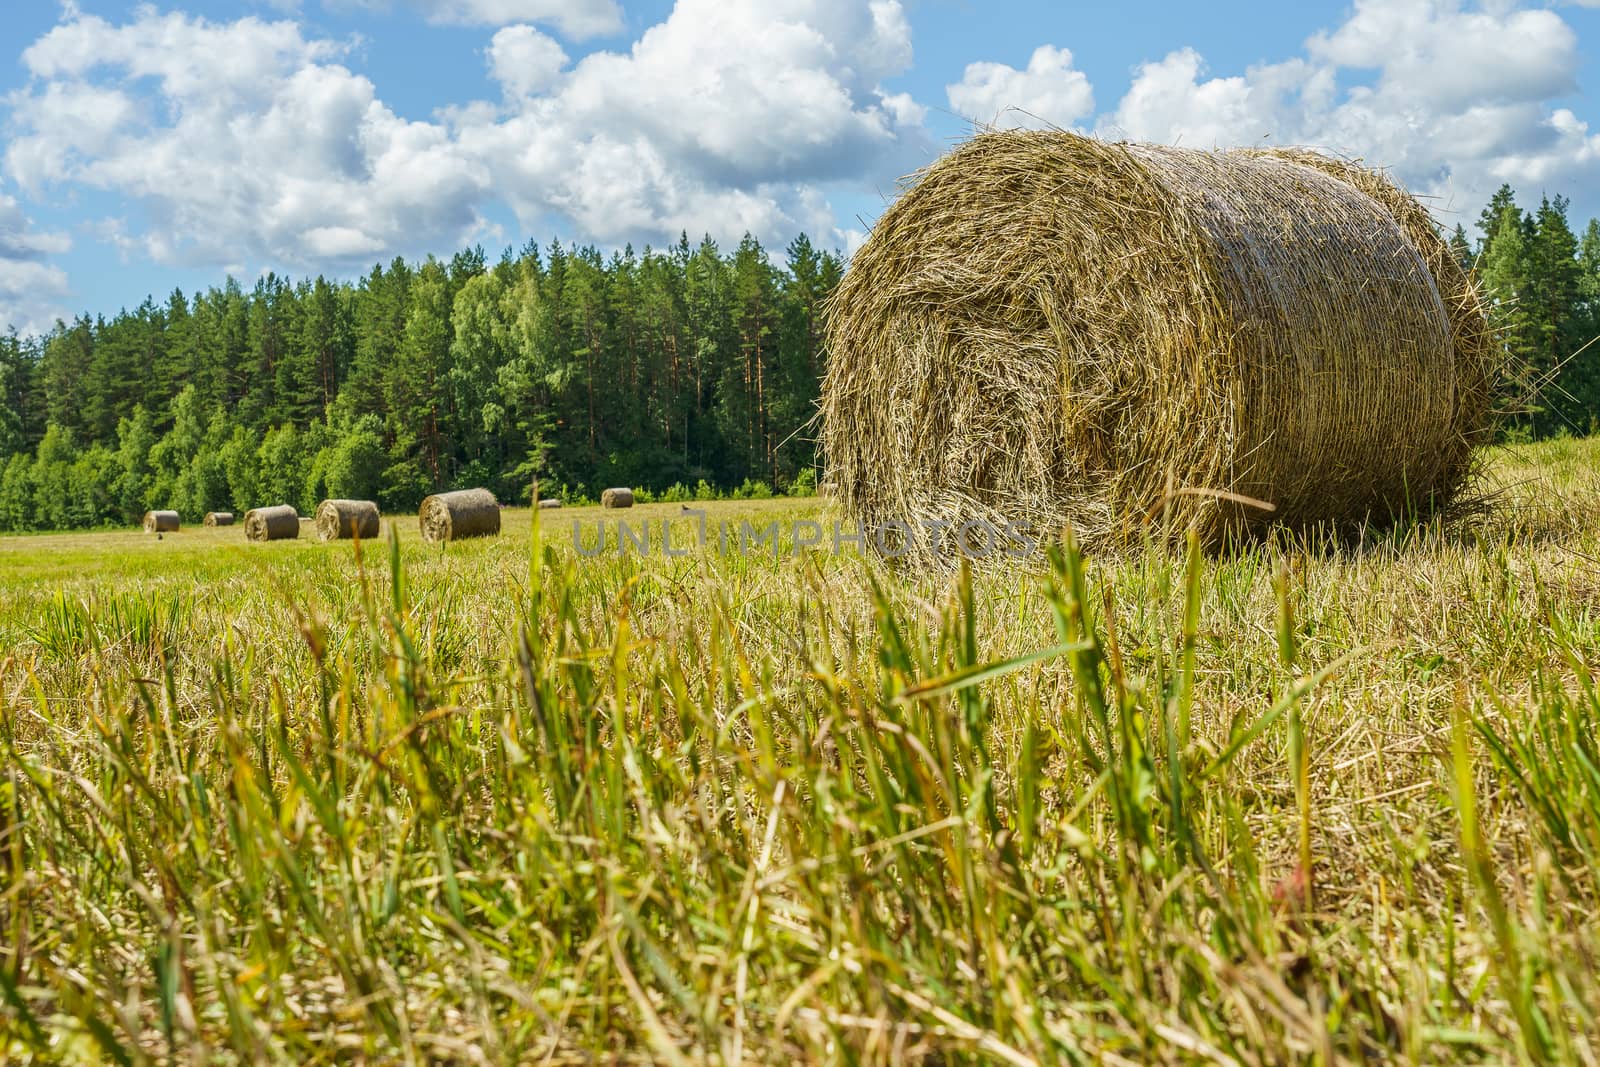 hay rolls on a grass field on a sunny summer day